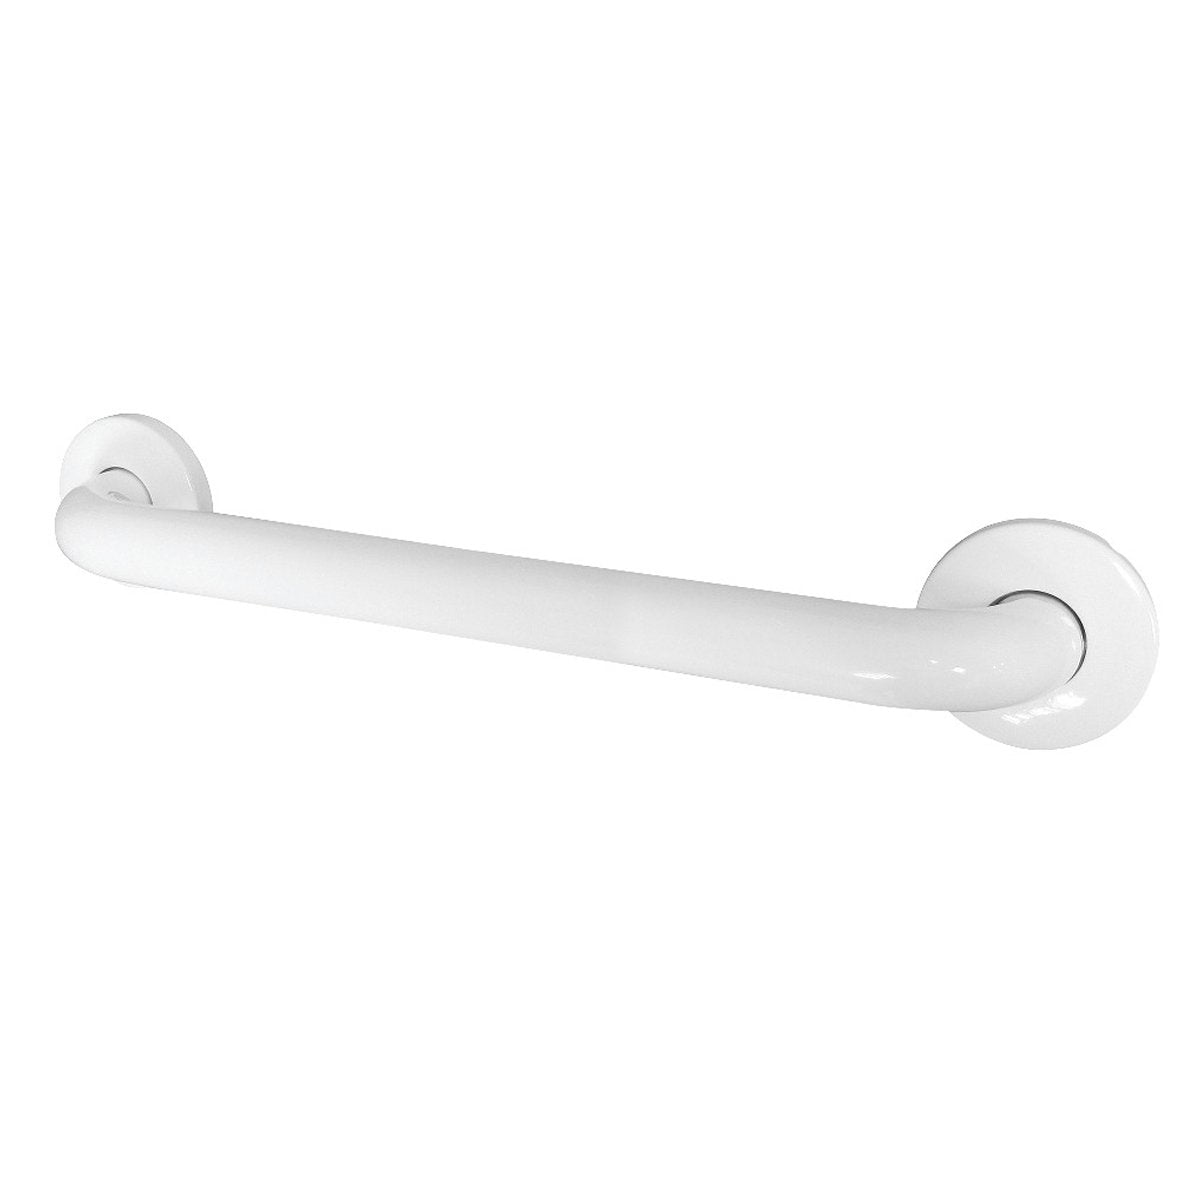 Kingston Brass GB1418CSW Made To Match 18-Inch Stainless Steel Grab Bar in White